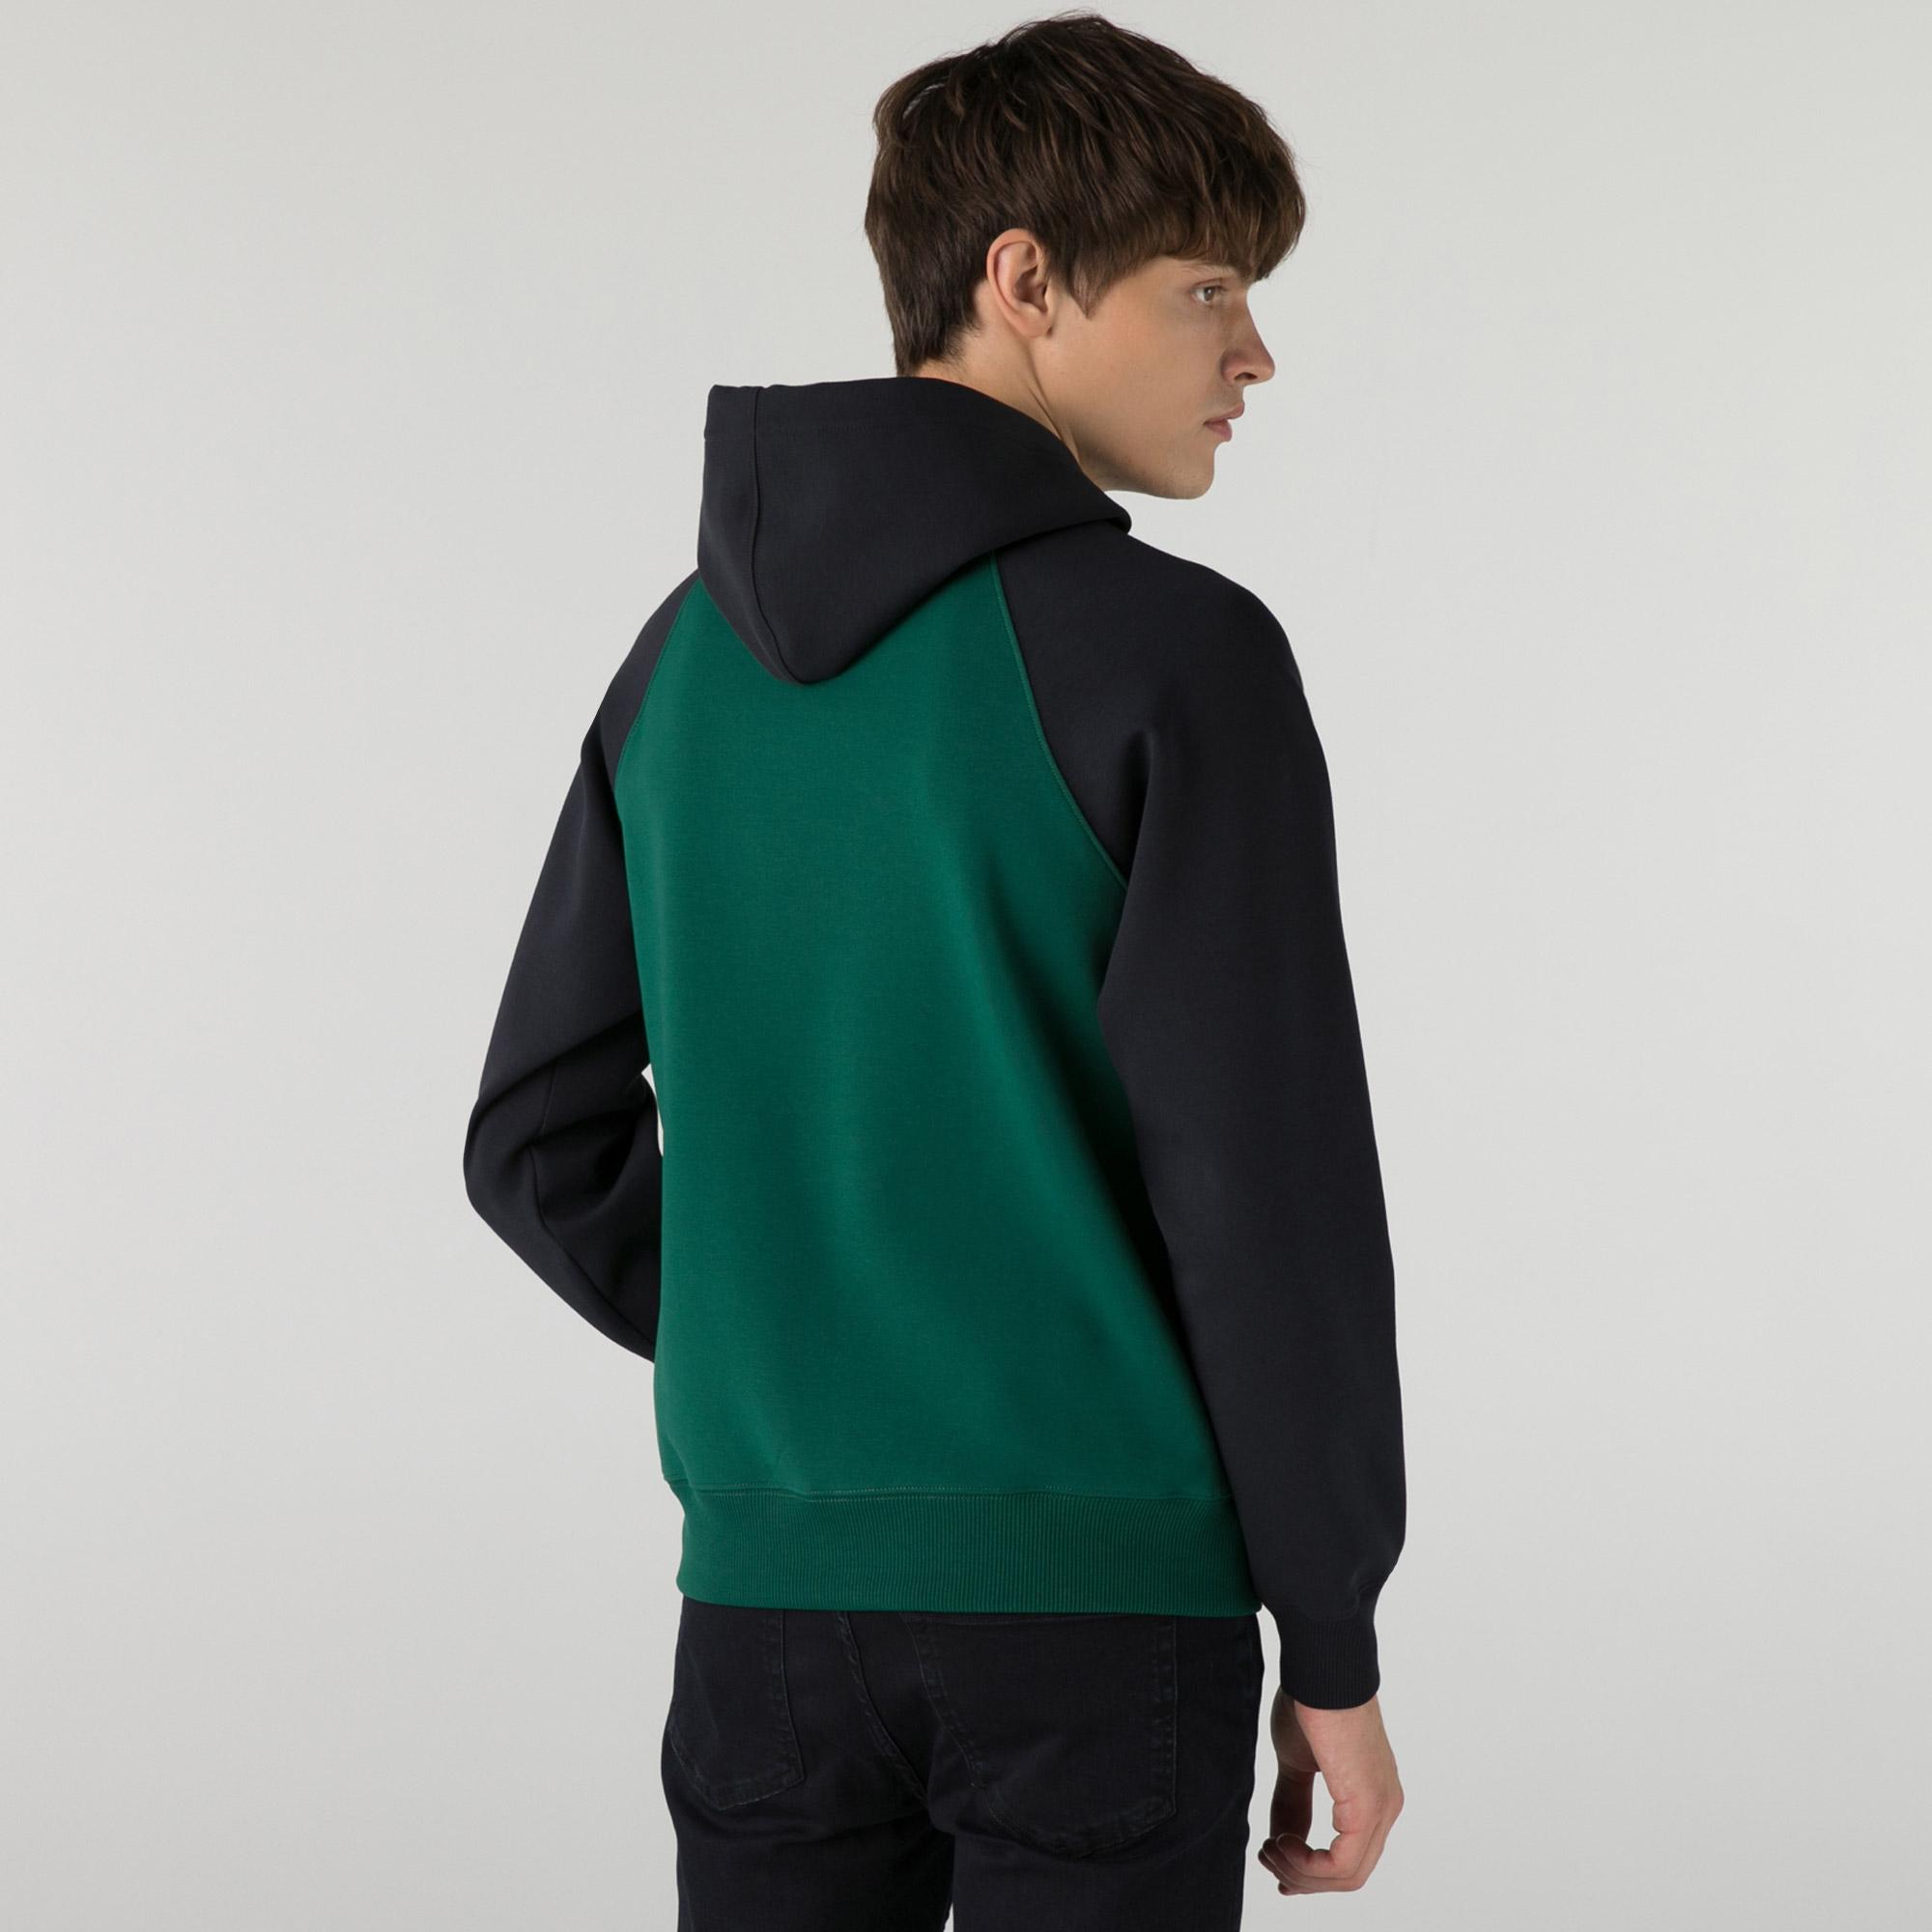 Lacoste Men's hoodie with hood with a zipper, two-color, contrasting